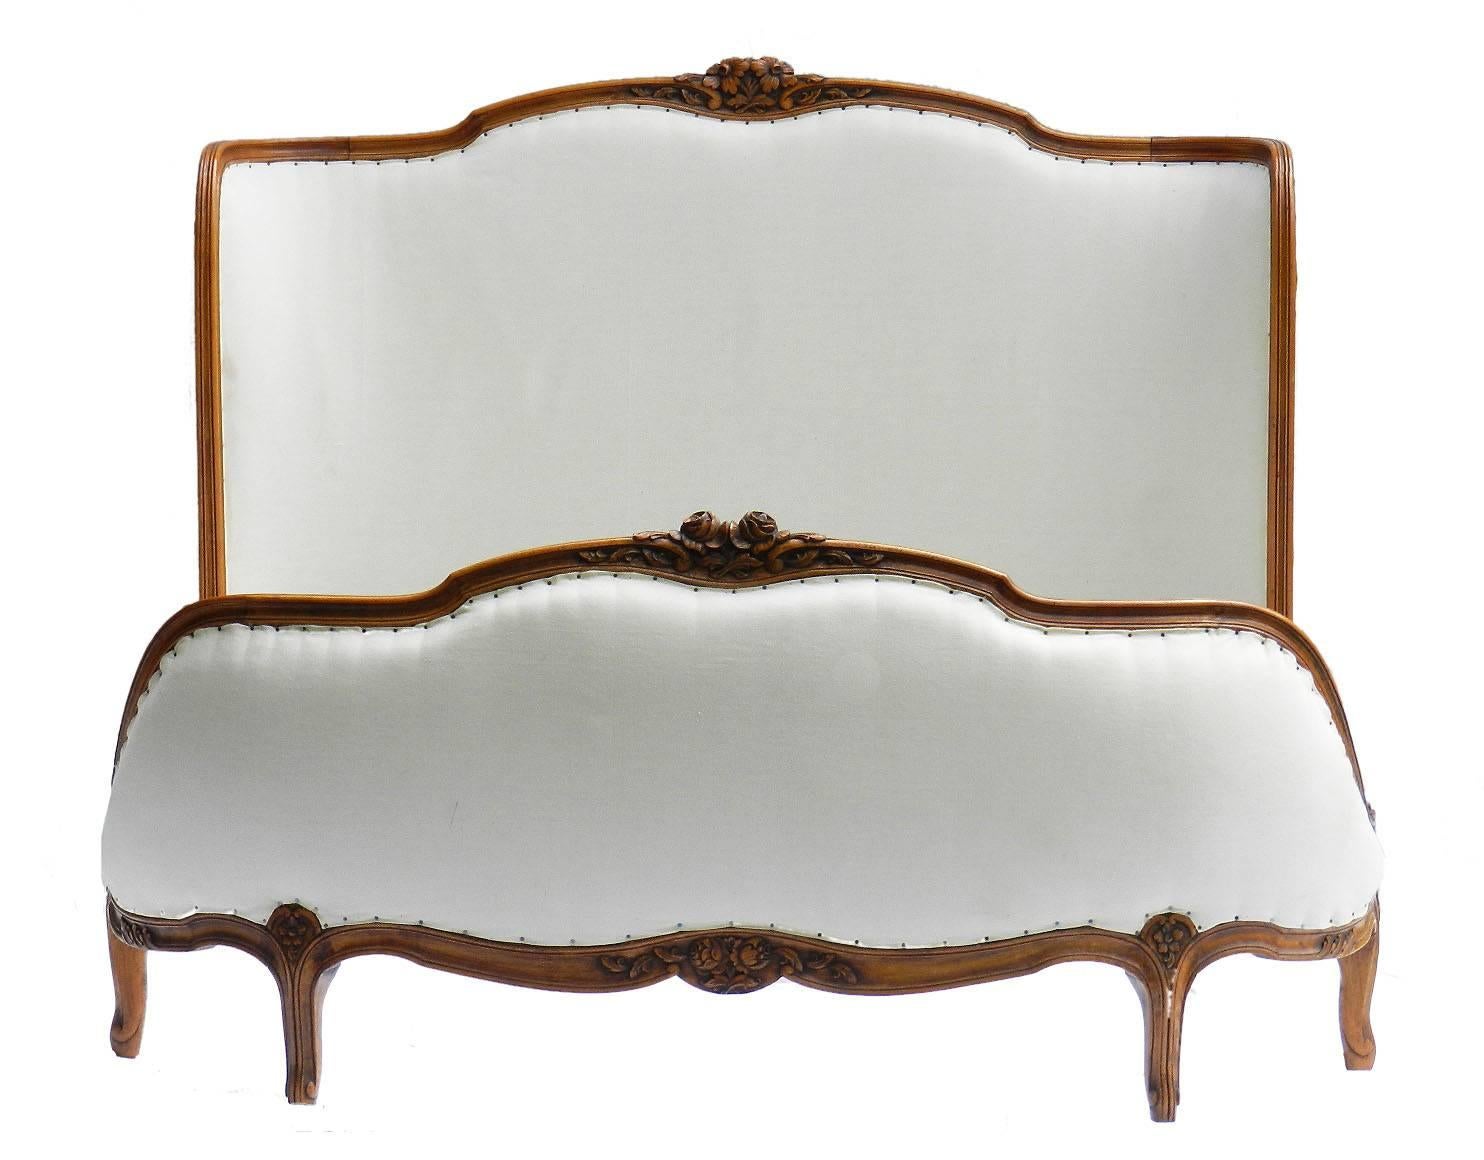 French bed US queen UK king-size rare full corbeille Louis XV revival
upholstered to metis ready for top covers to suit your interior
We are happy to recover this free of charge before shipping,  cost of fabric is not included please ask for more